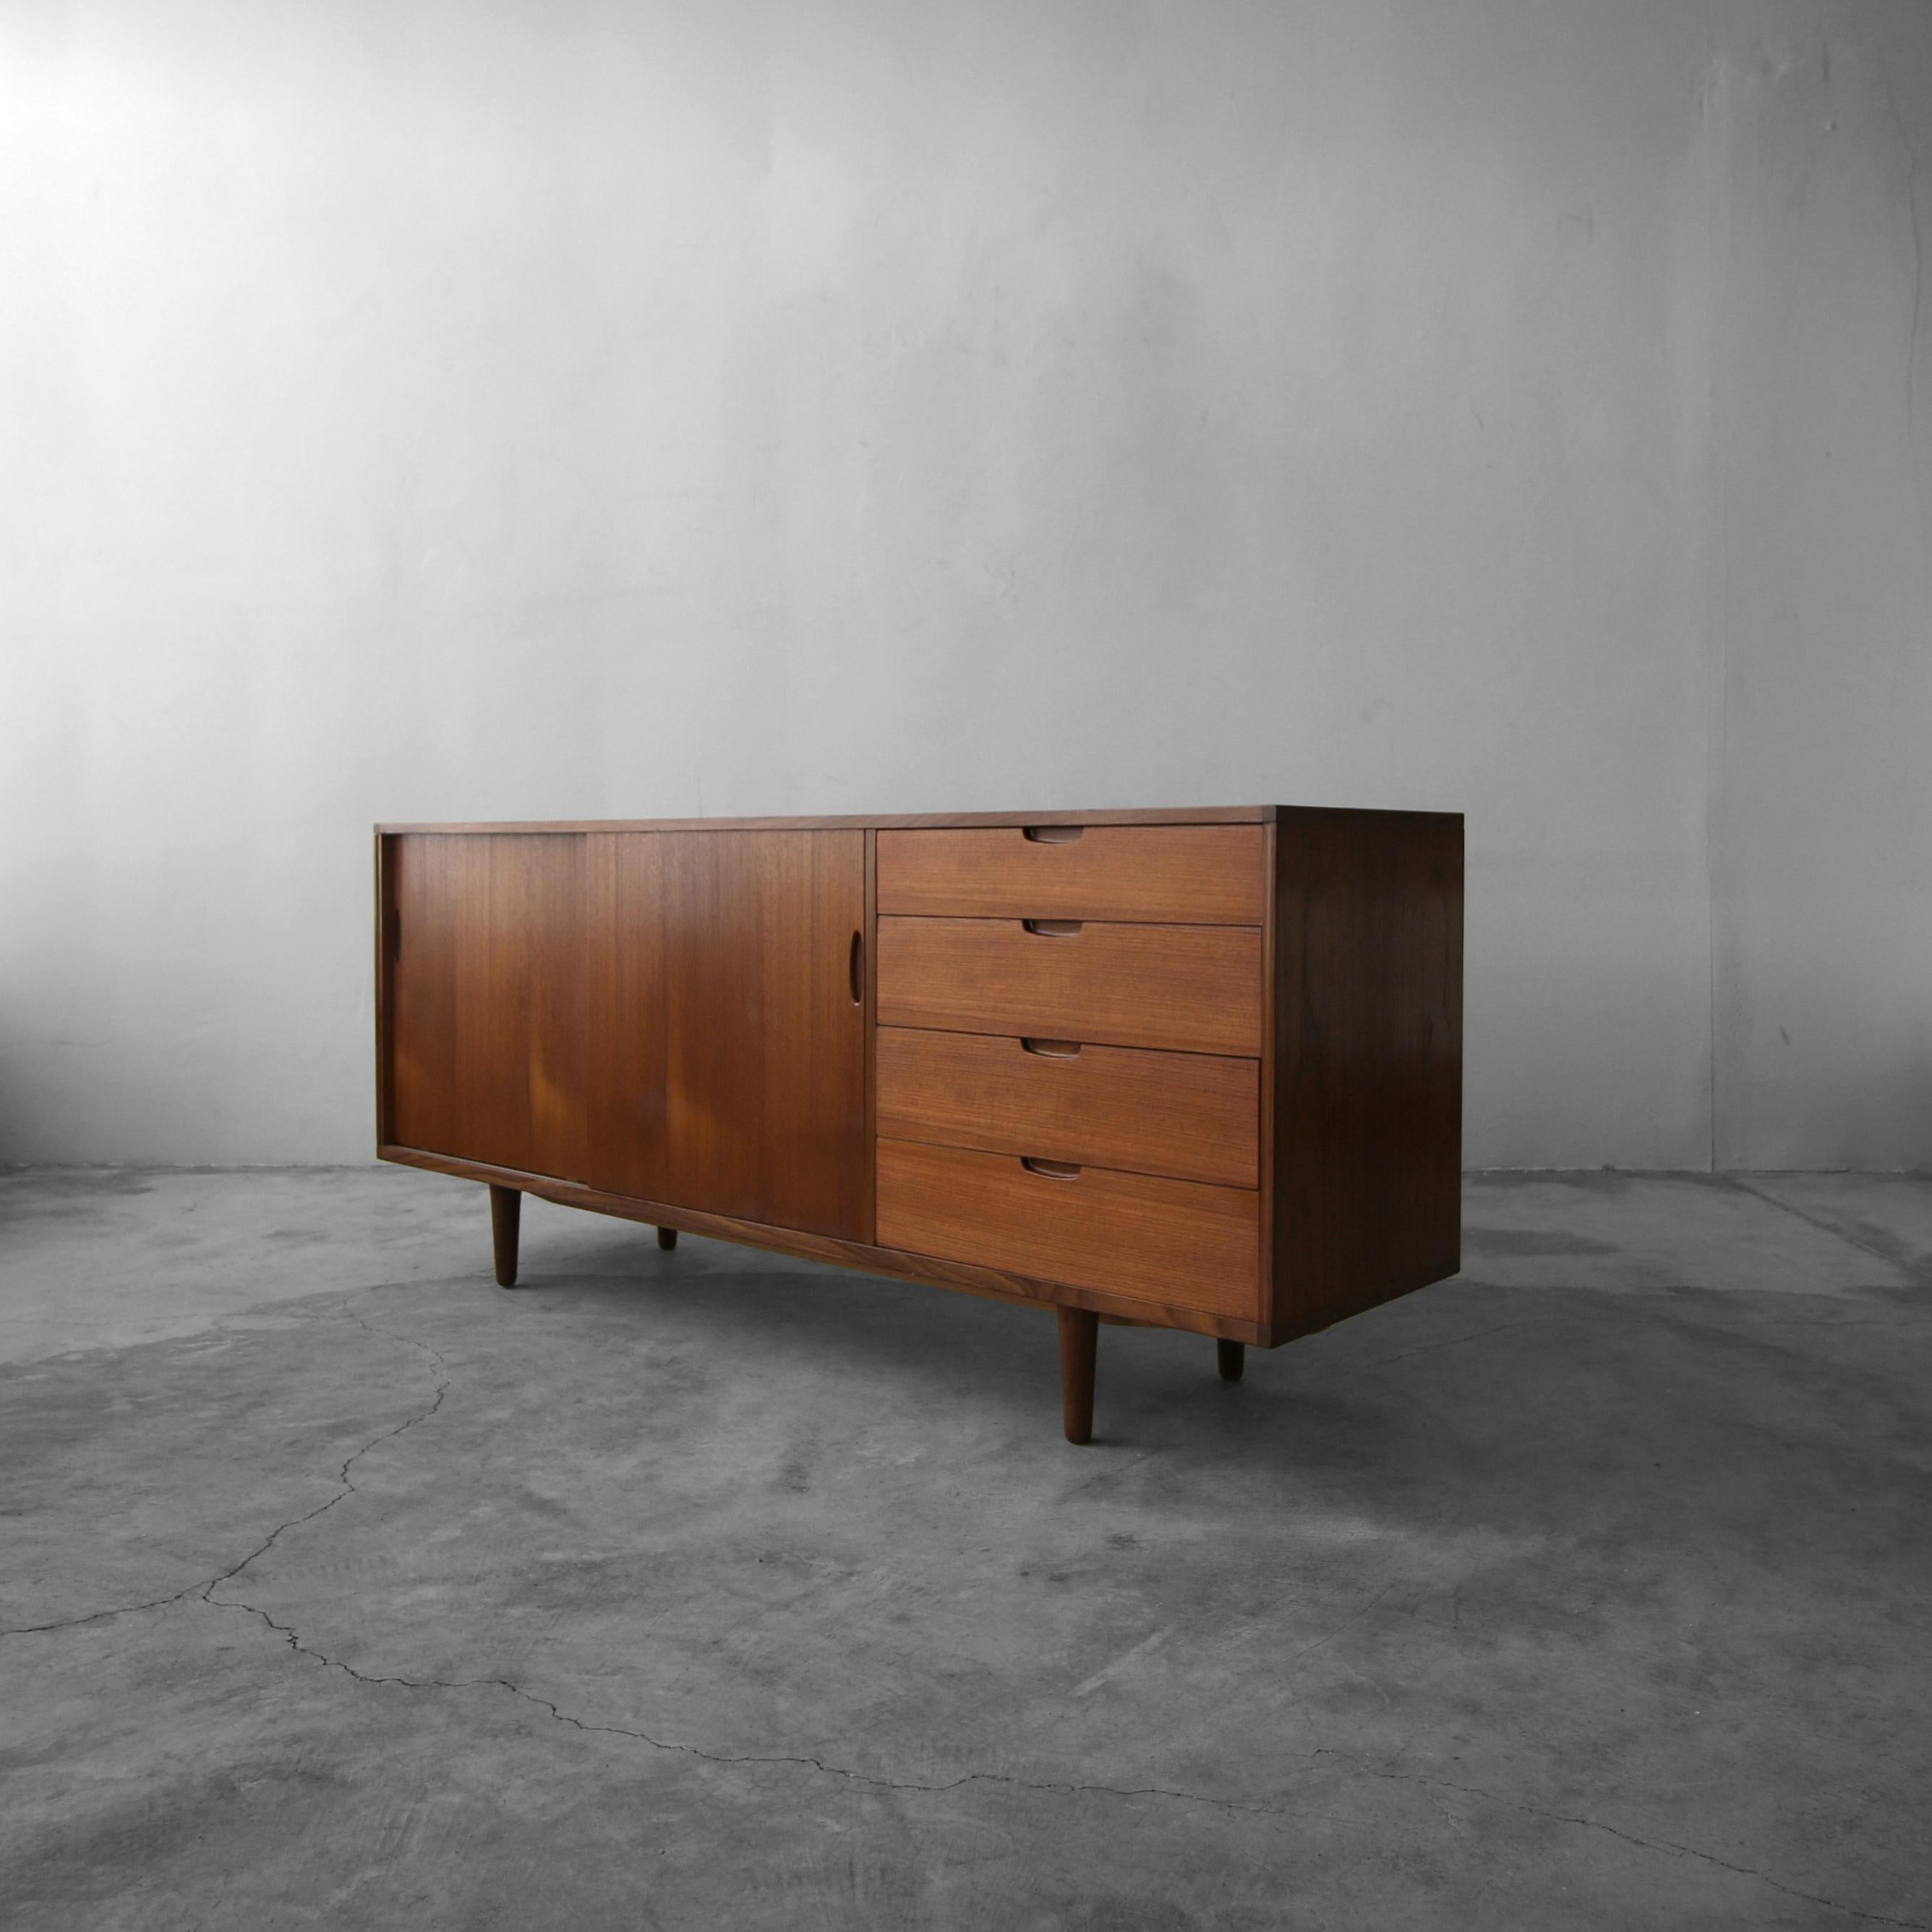 Simply perfect Danish teak credenza by IB Kofod Larsen for Clausen and Sons. The simplicity and clean lines make this beauty a Classic. A little bit shorter in length than a lot of Danish credenzas at 6 foot, this may be the perfect piece you've